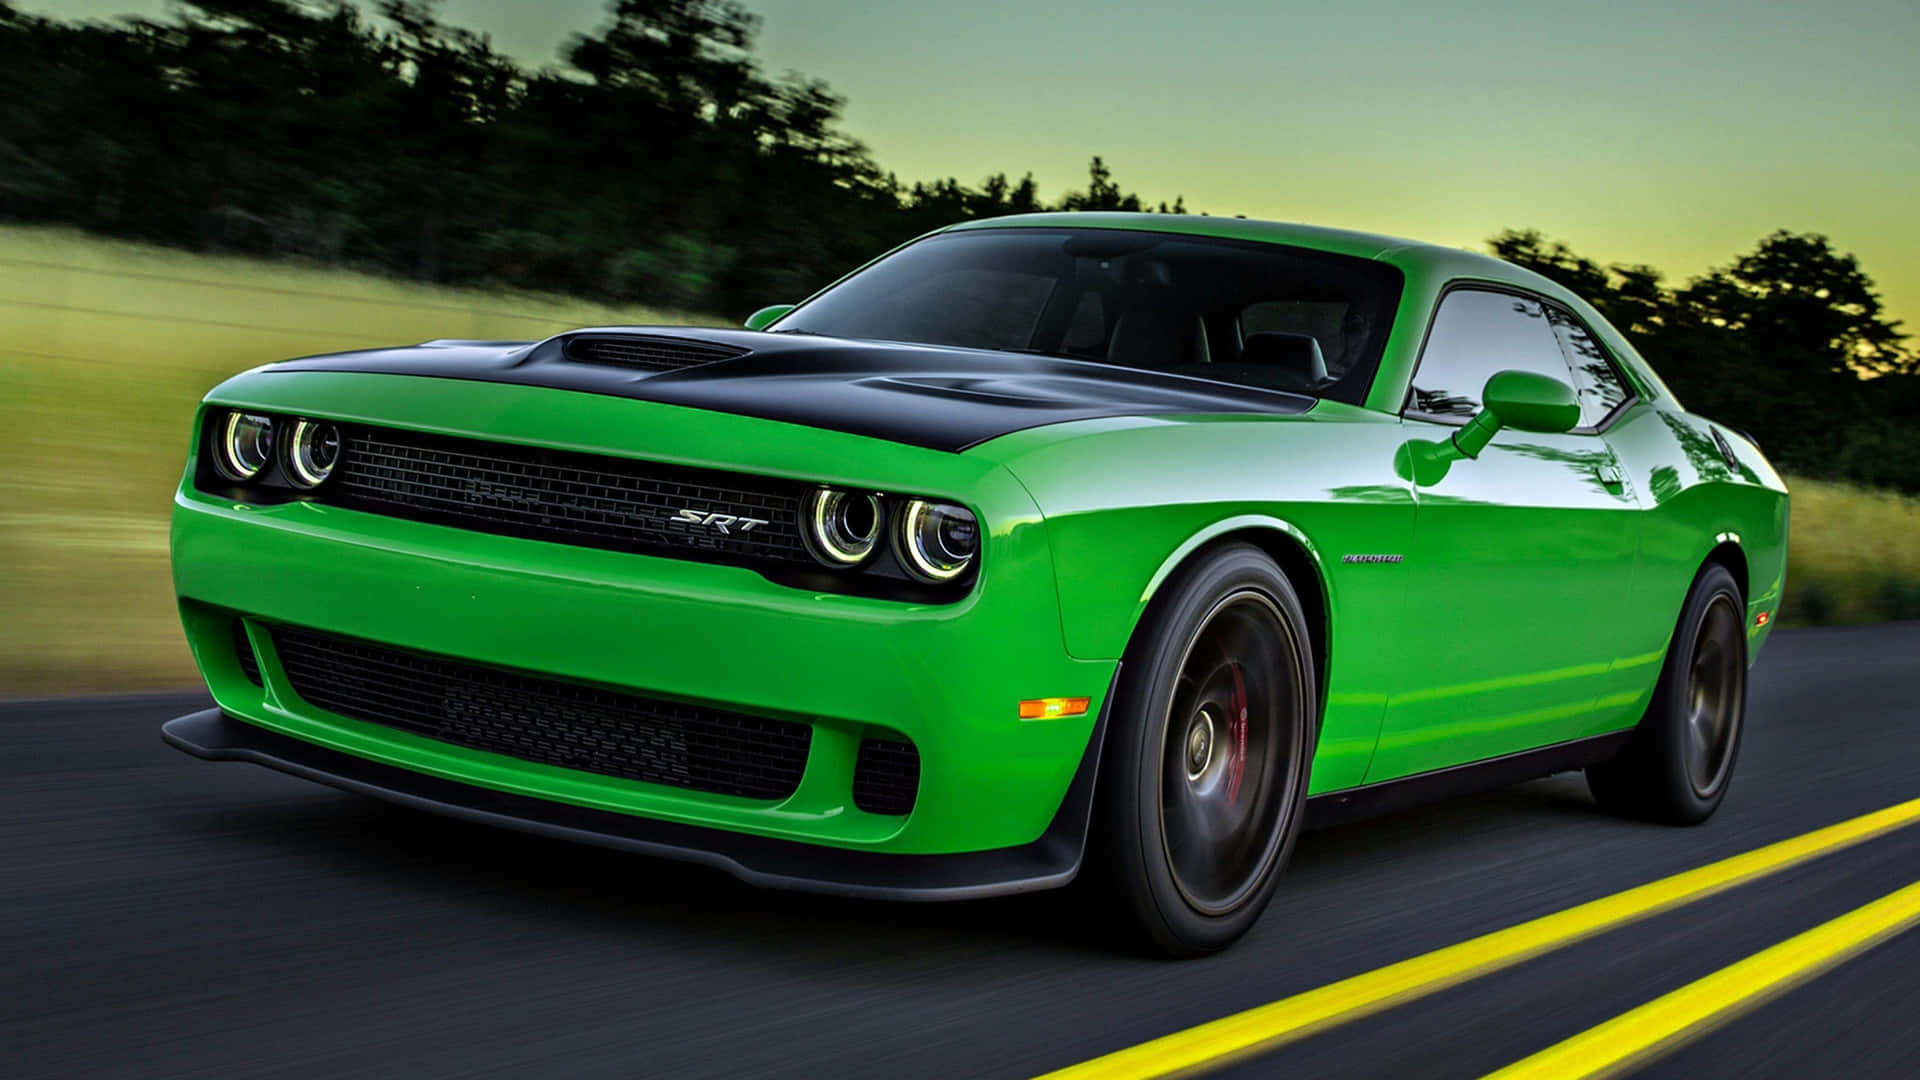 "Take a ride with the Dodge Hellcat - a high-performance muscle car that offers speed and power." Wallpaper